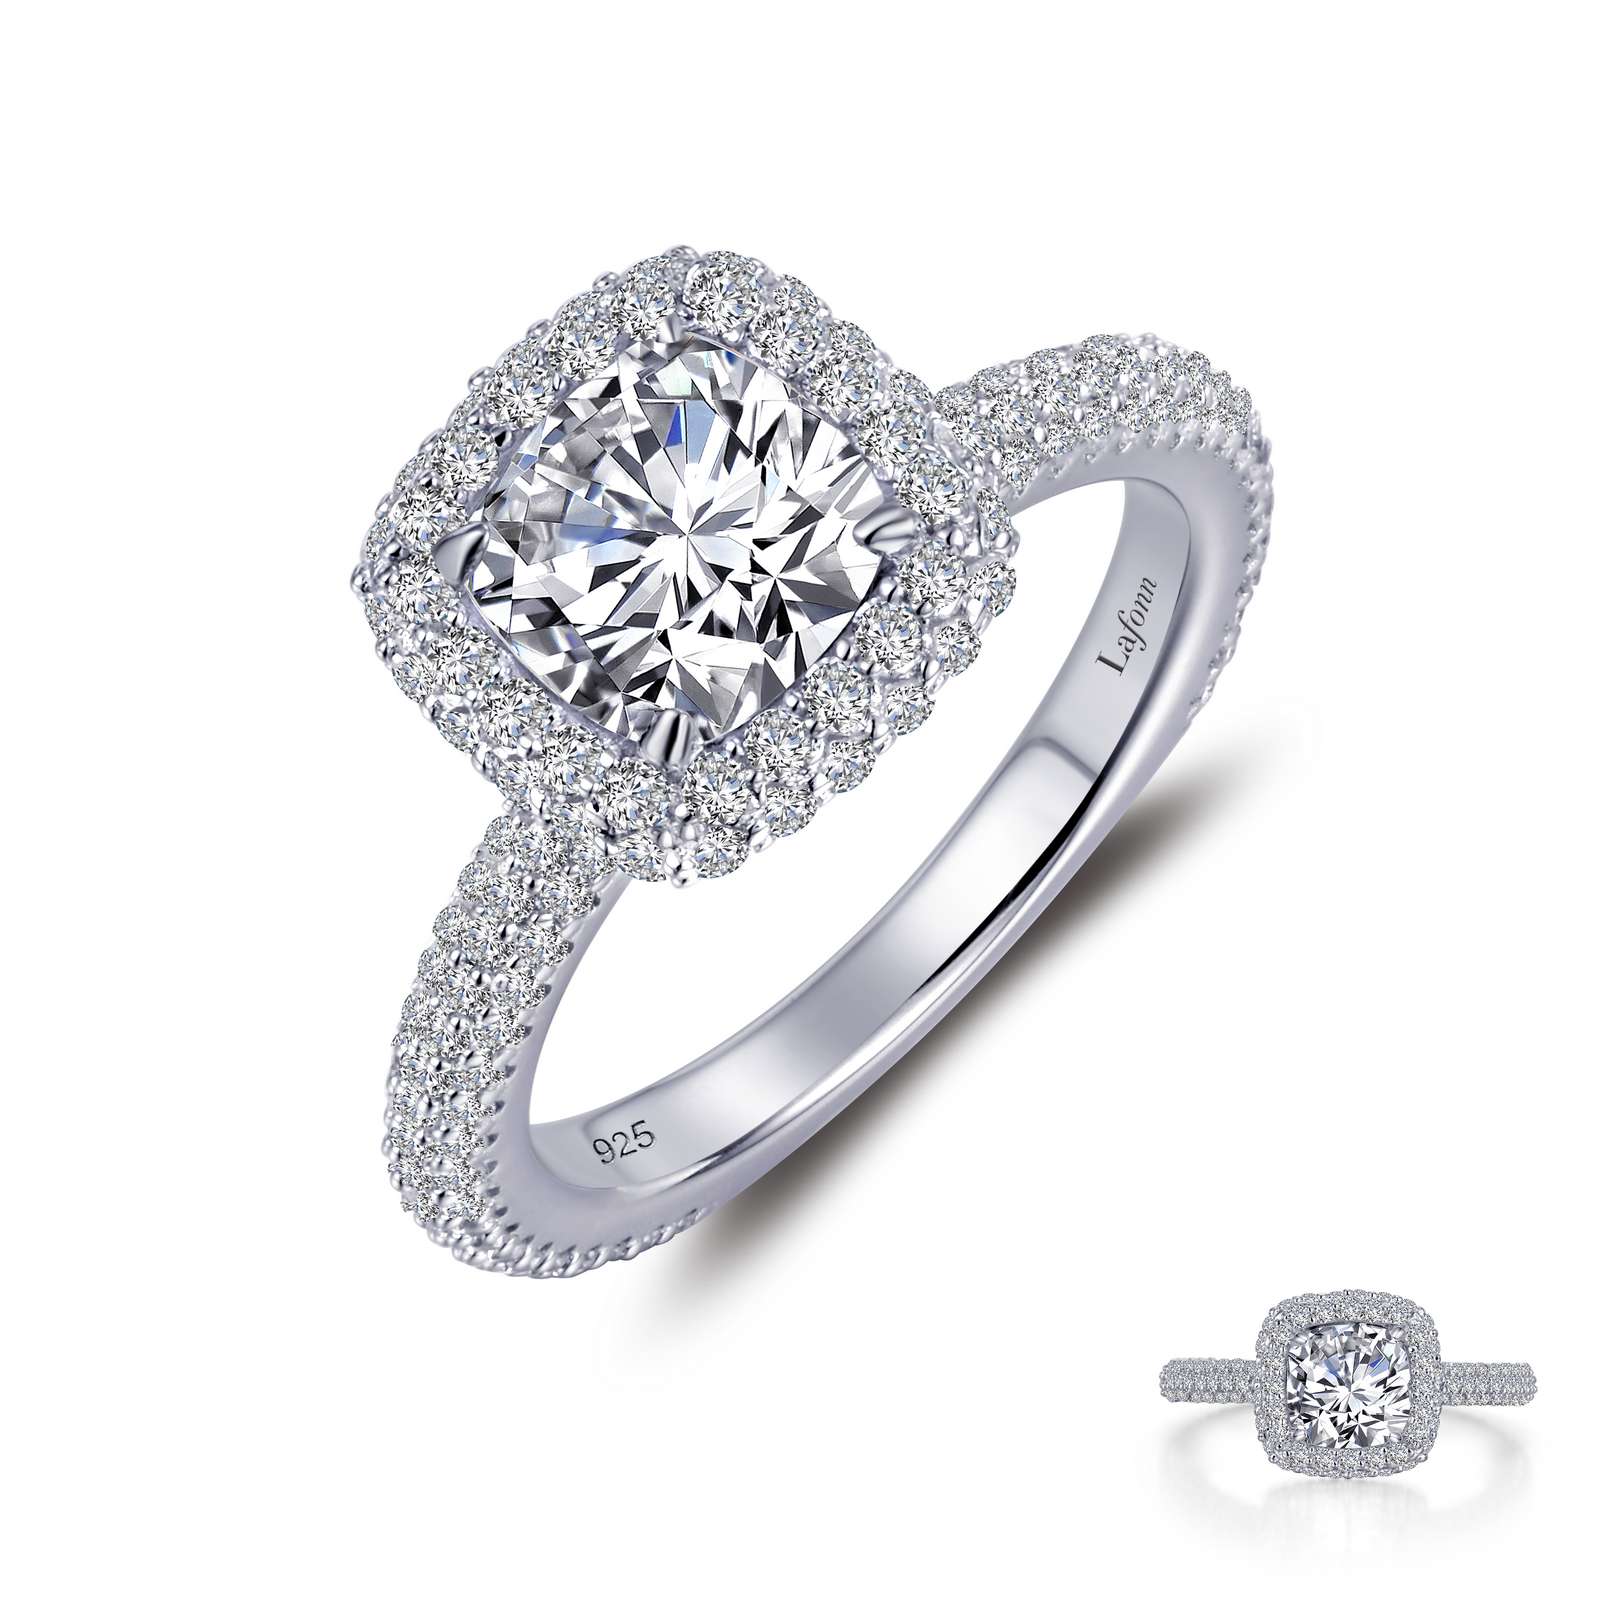 Stunning Engagement Ring by Lafonn